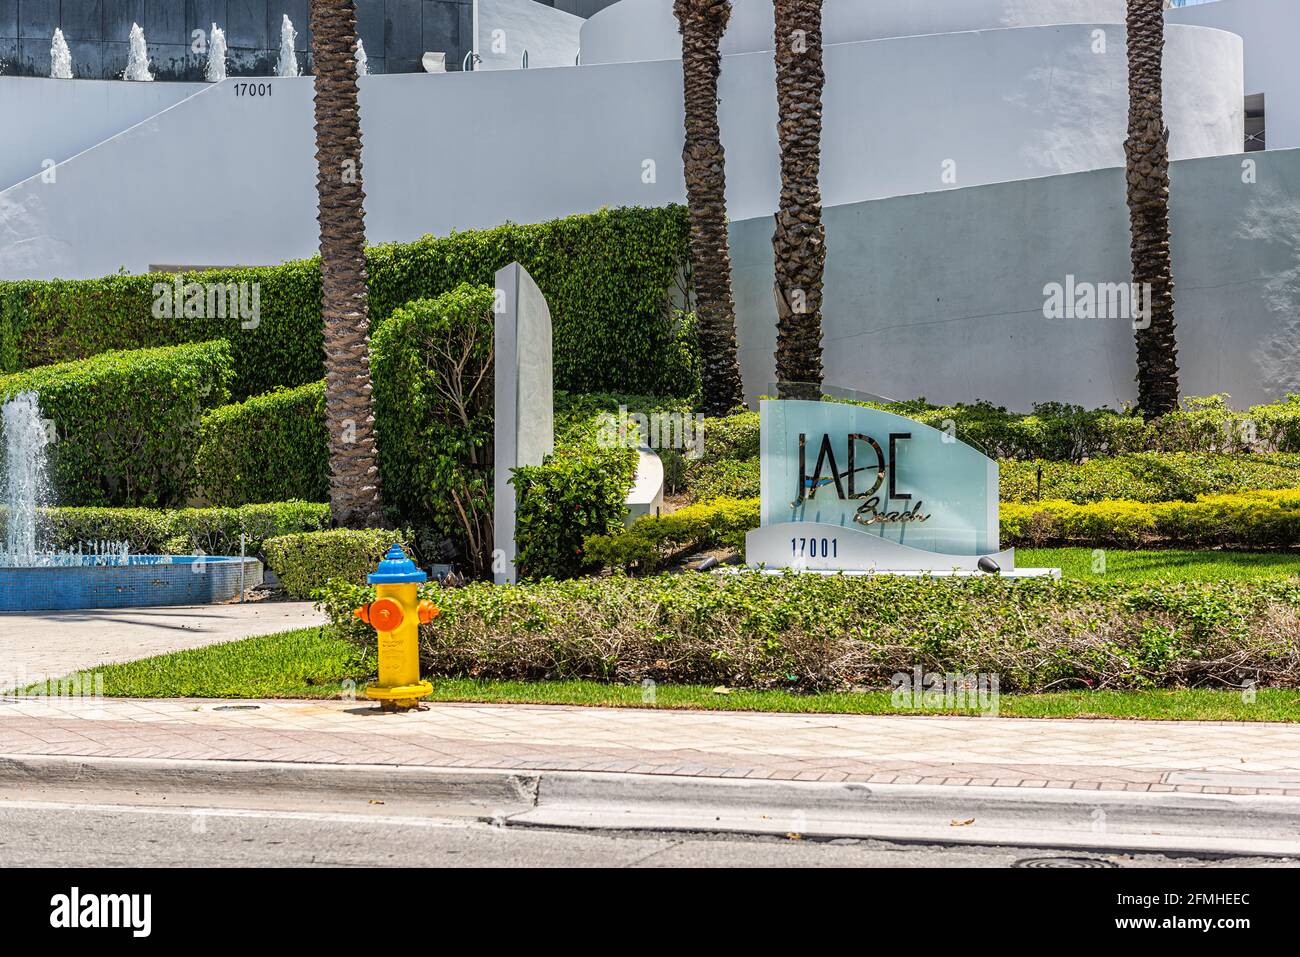 Sunny Isles Beach, USA - May 8, 2018: Jade condominium condo apartment complex building in Miami, Florida with sign, water fountain and sidewalk Stock Photo